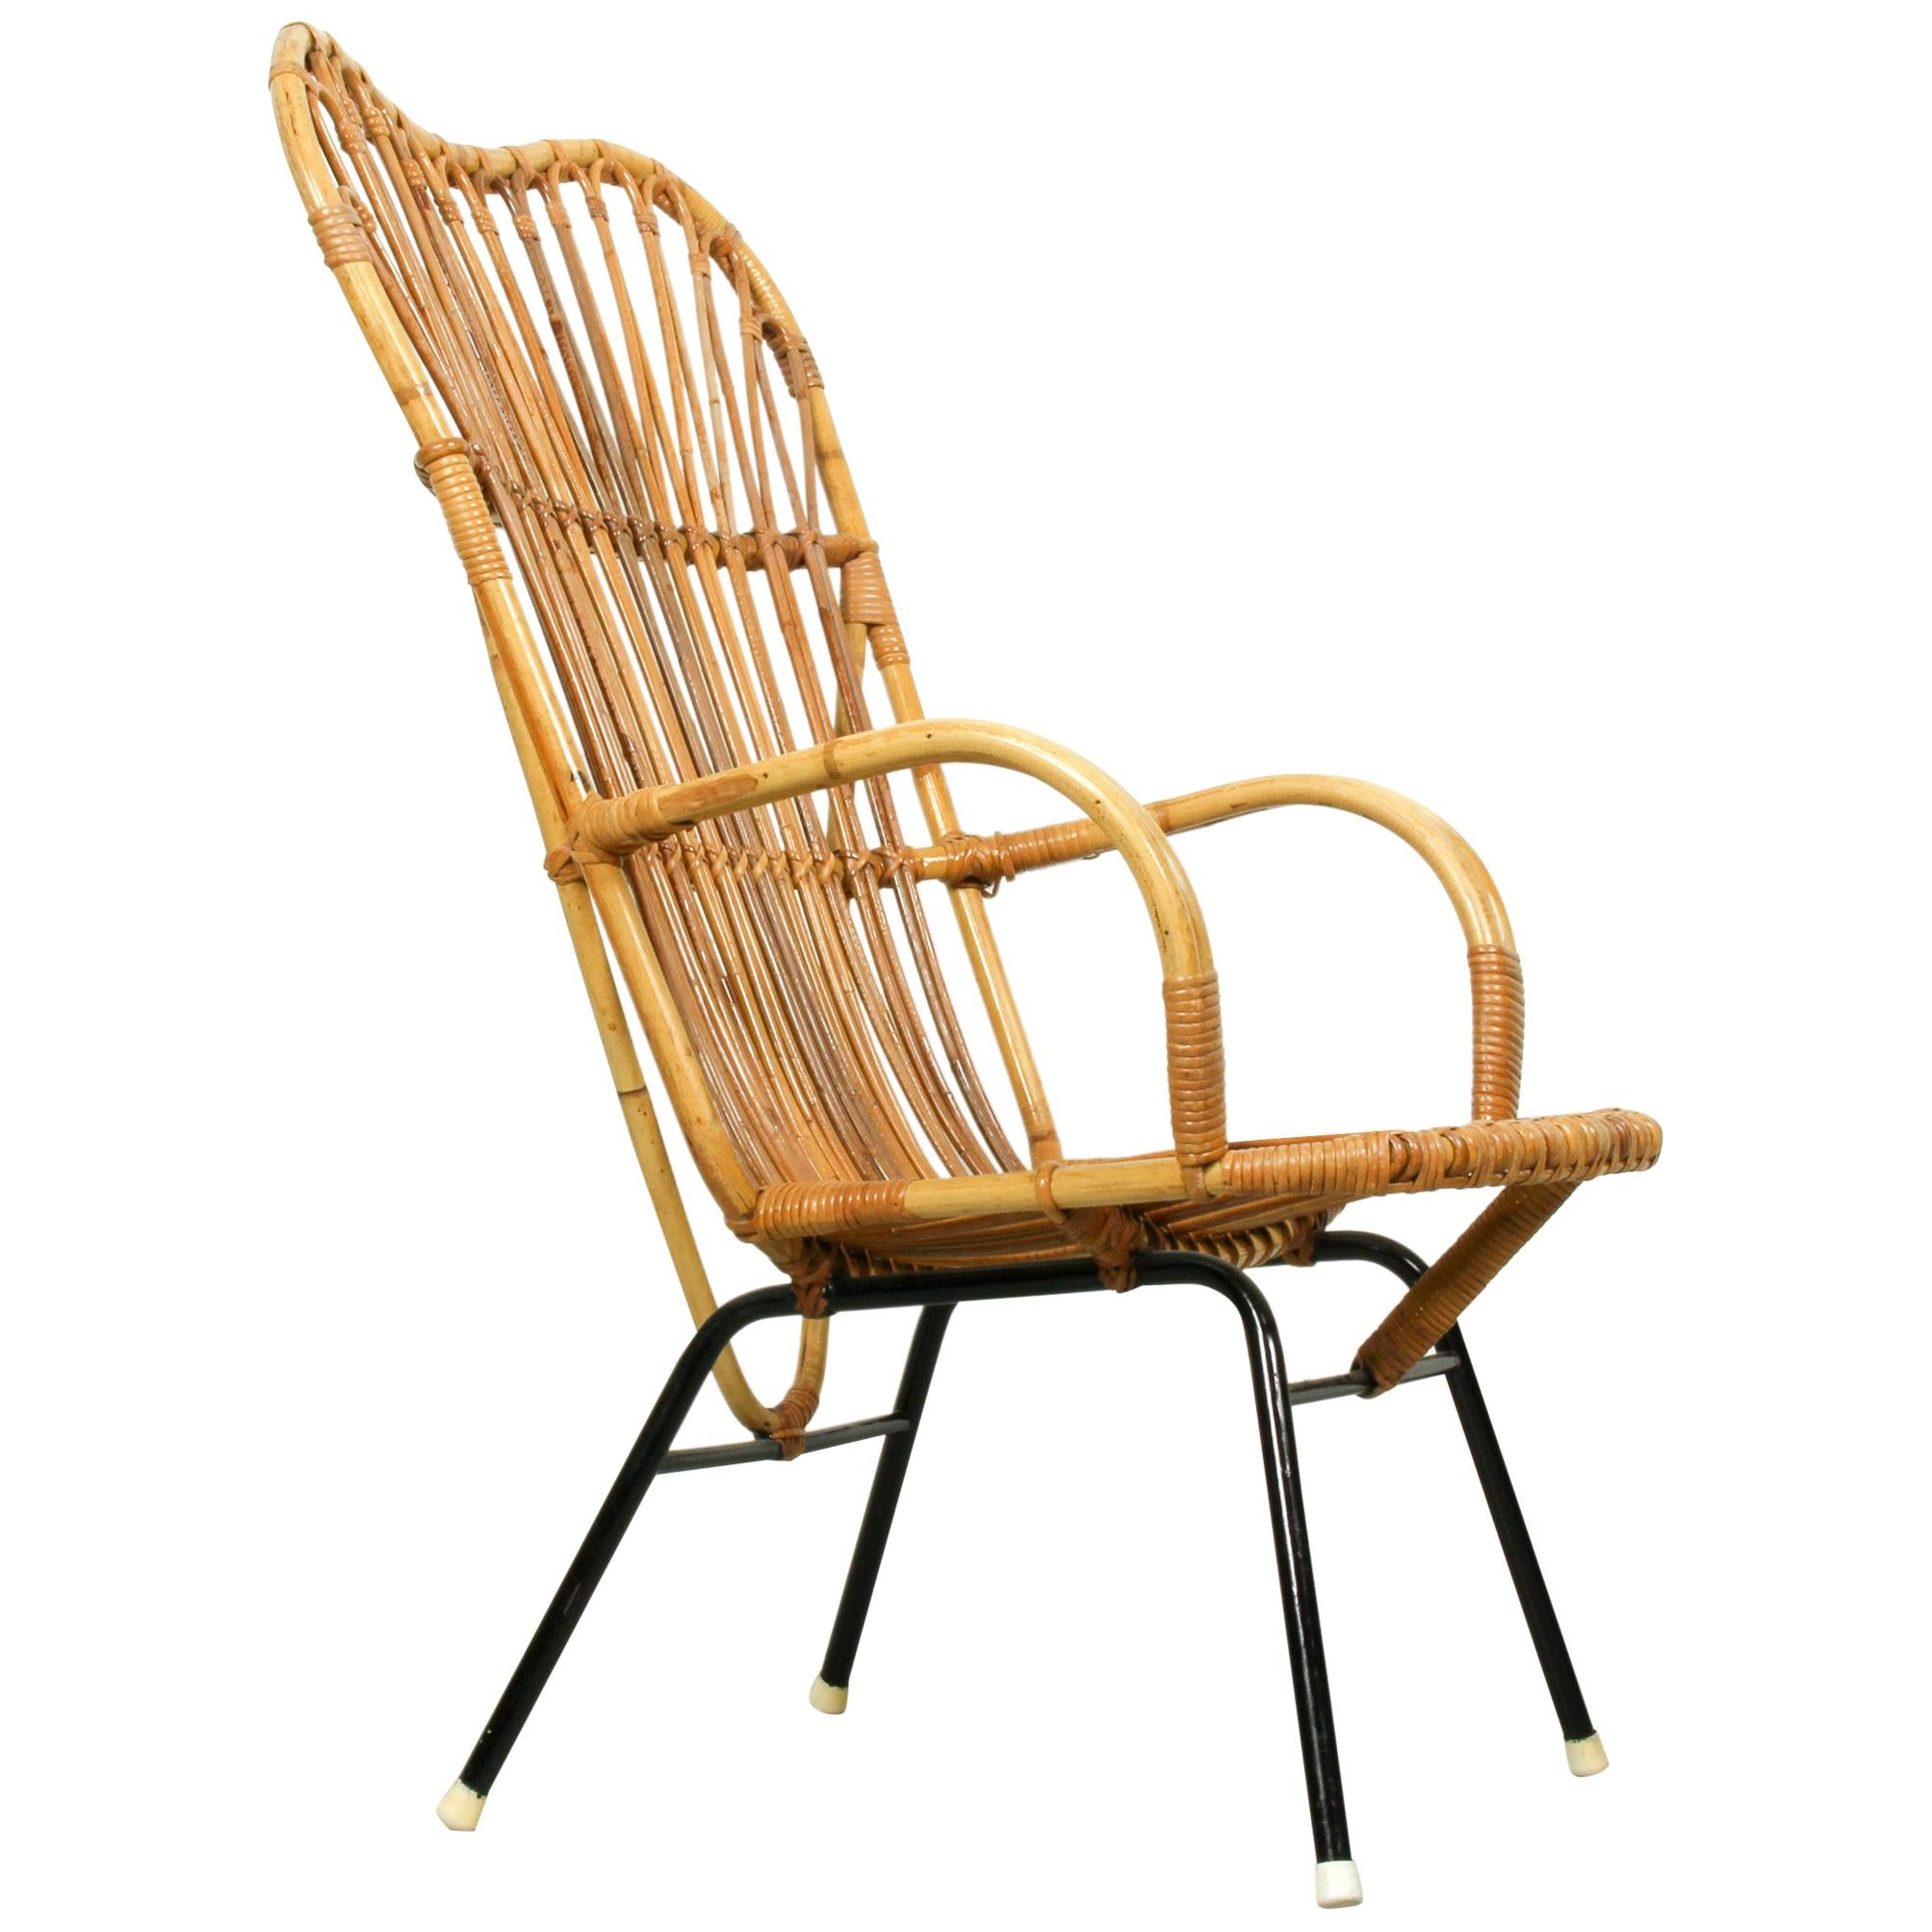 Metal and Rattan Terrace or Lounge Chair from Rohé Noordwolde, 1960s